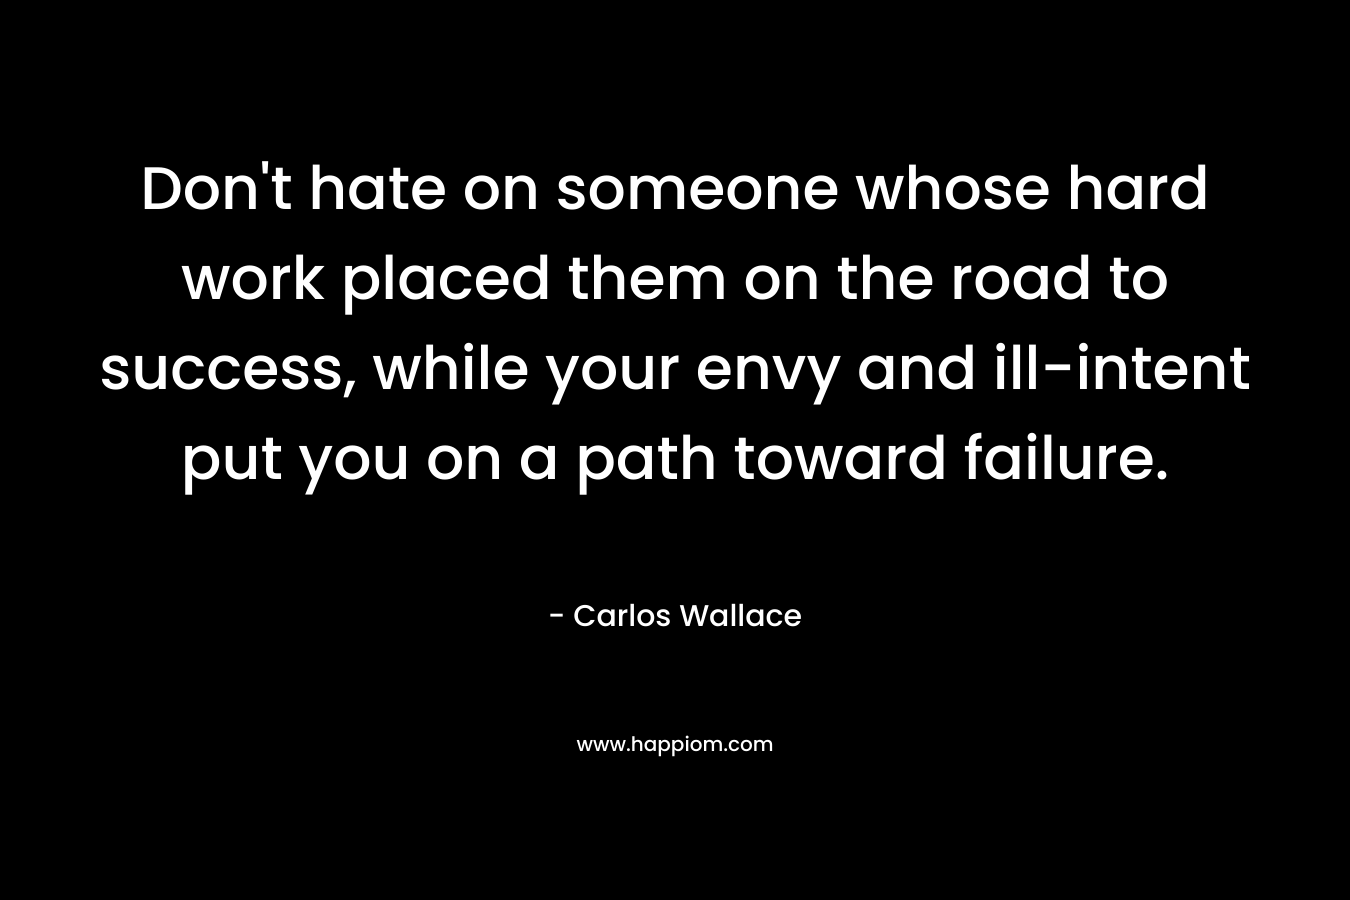 Don't hate on someone whose hard work placed them on the road to success, while your envy and ill-intent put you on a path toward failure.